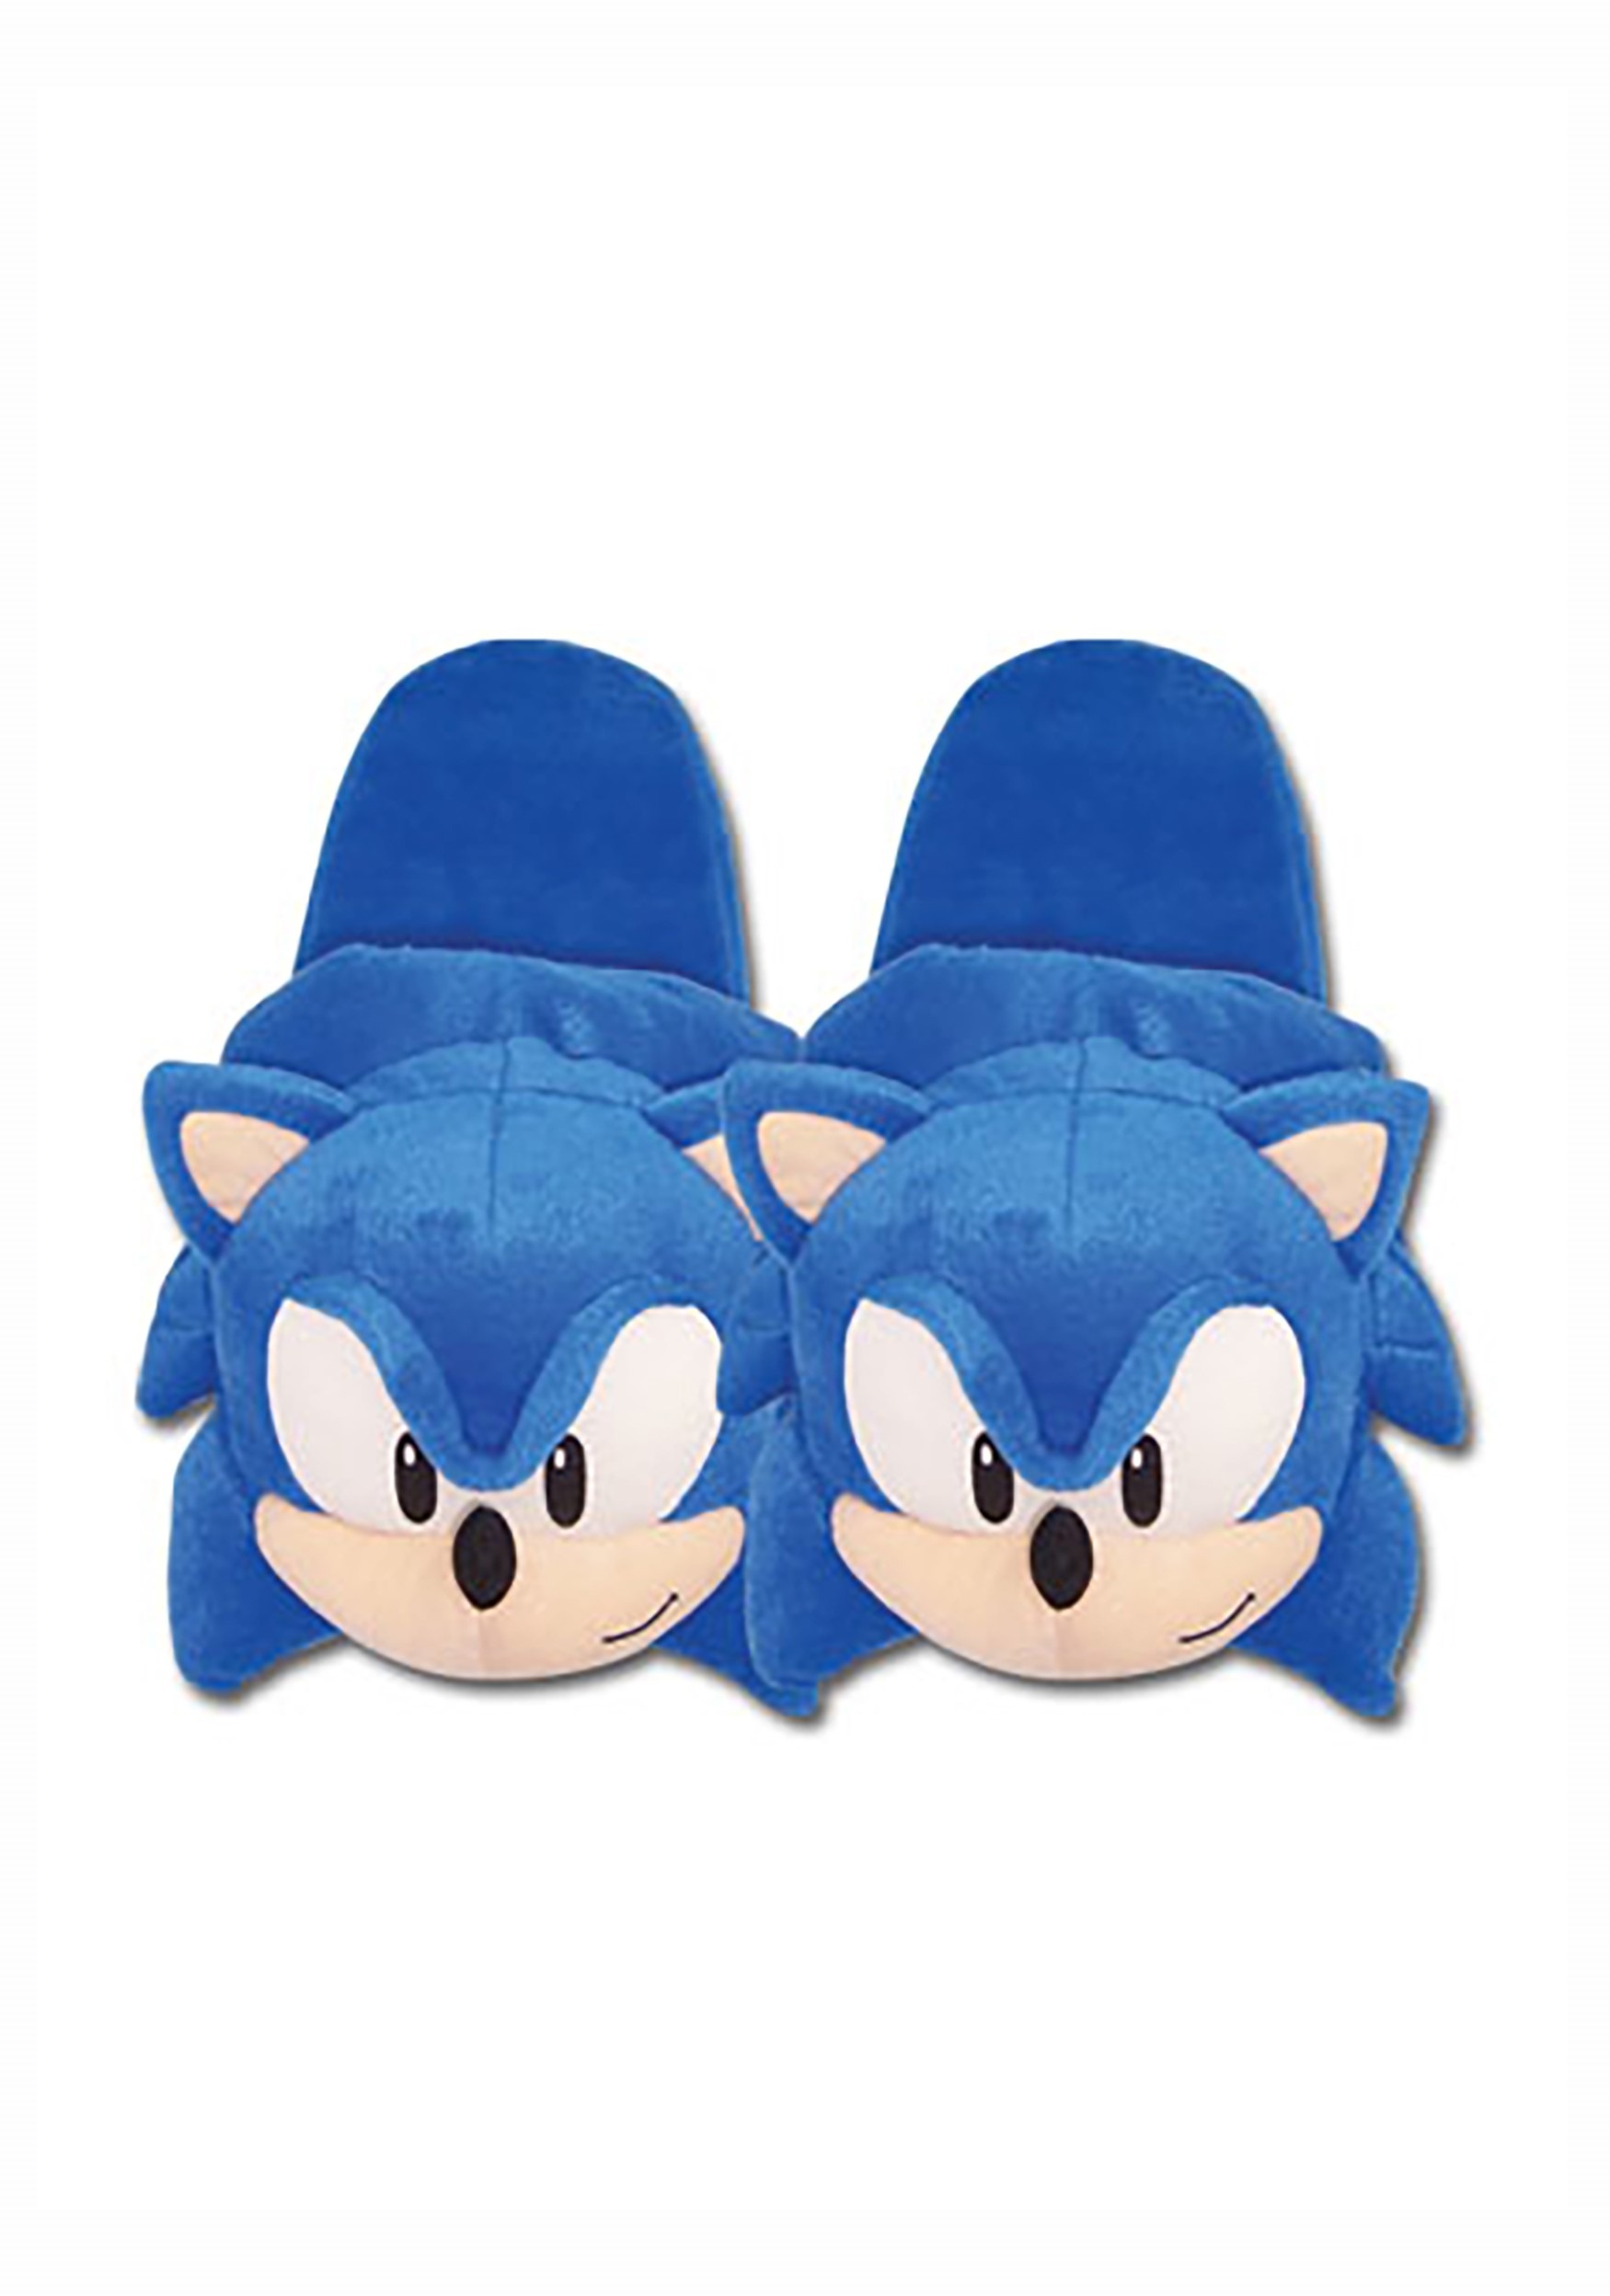 Sonic the Hedgehog Slippers 